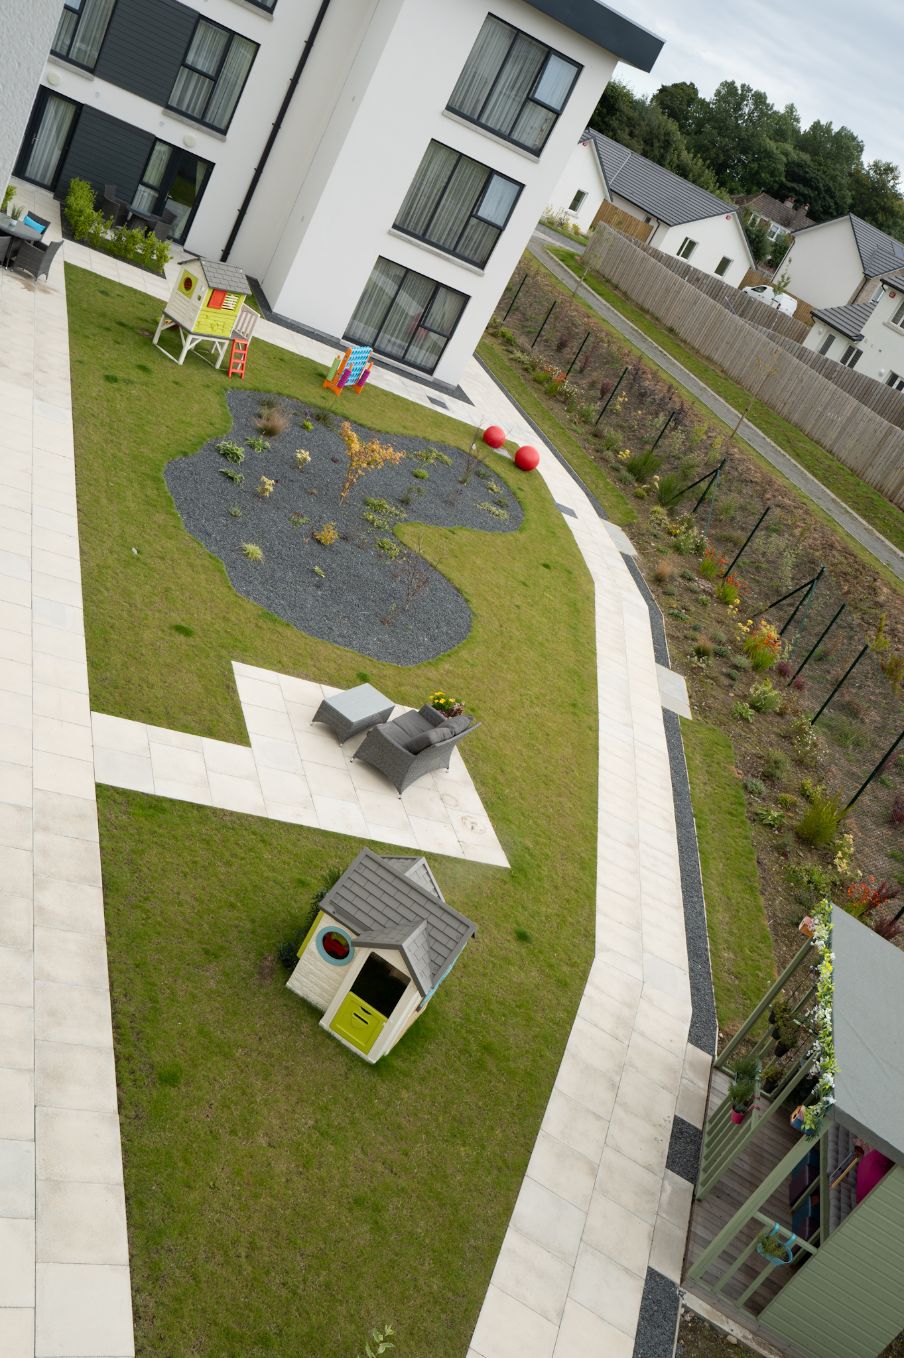 Woodlands Garden with Play Area